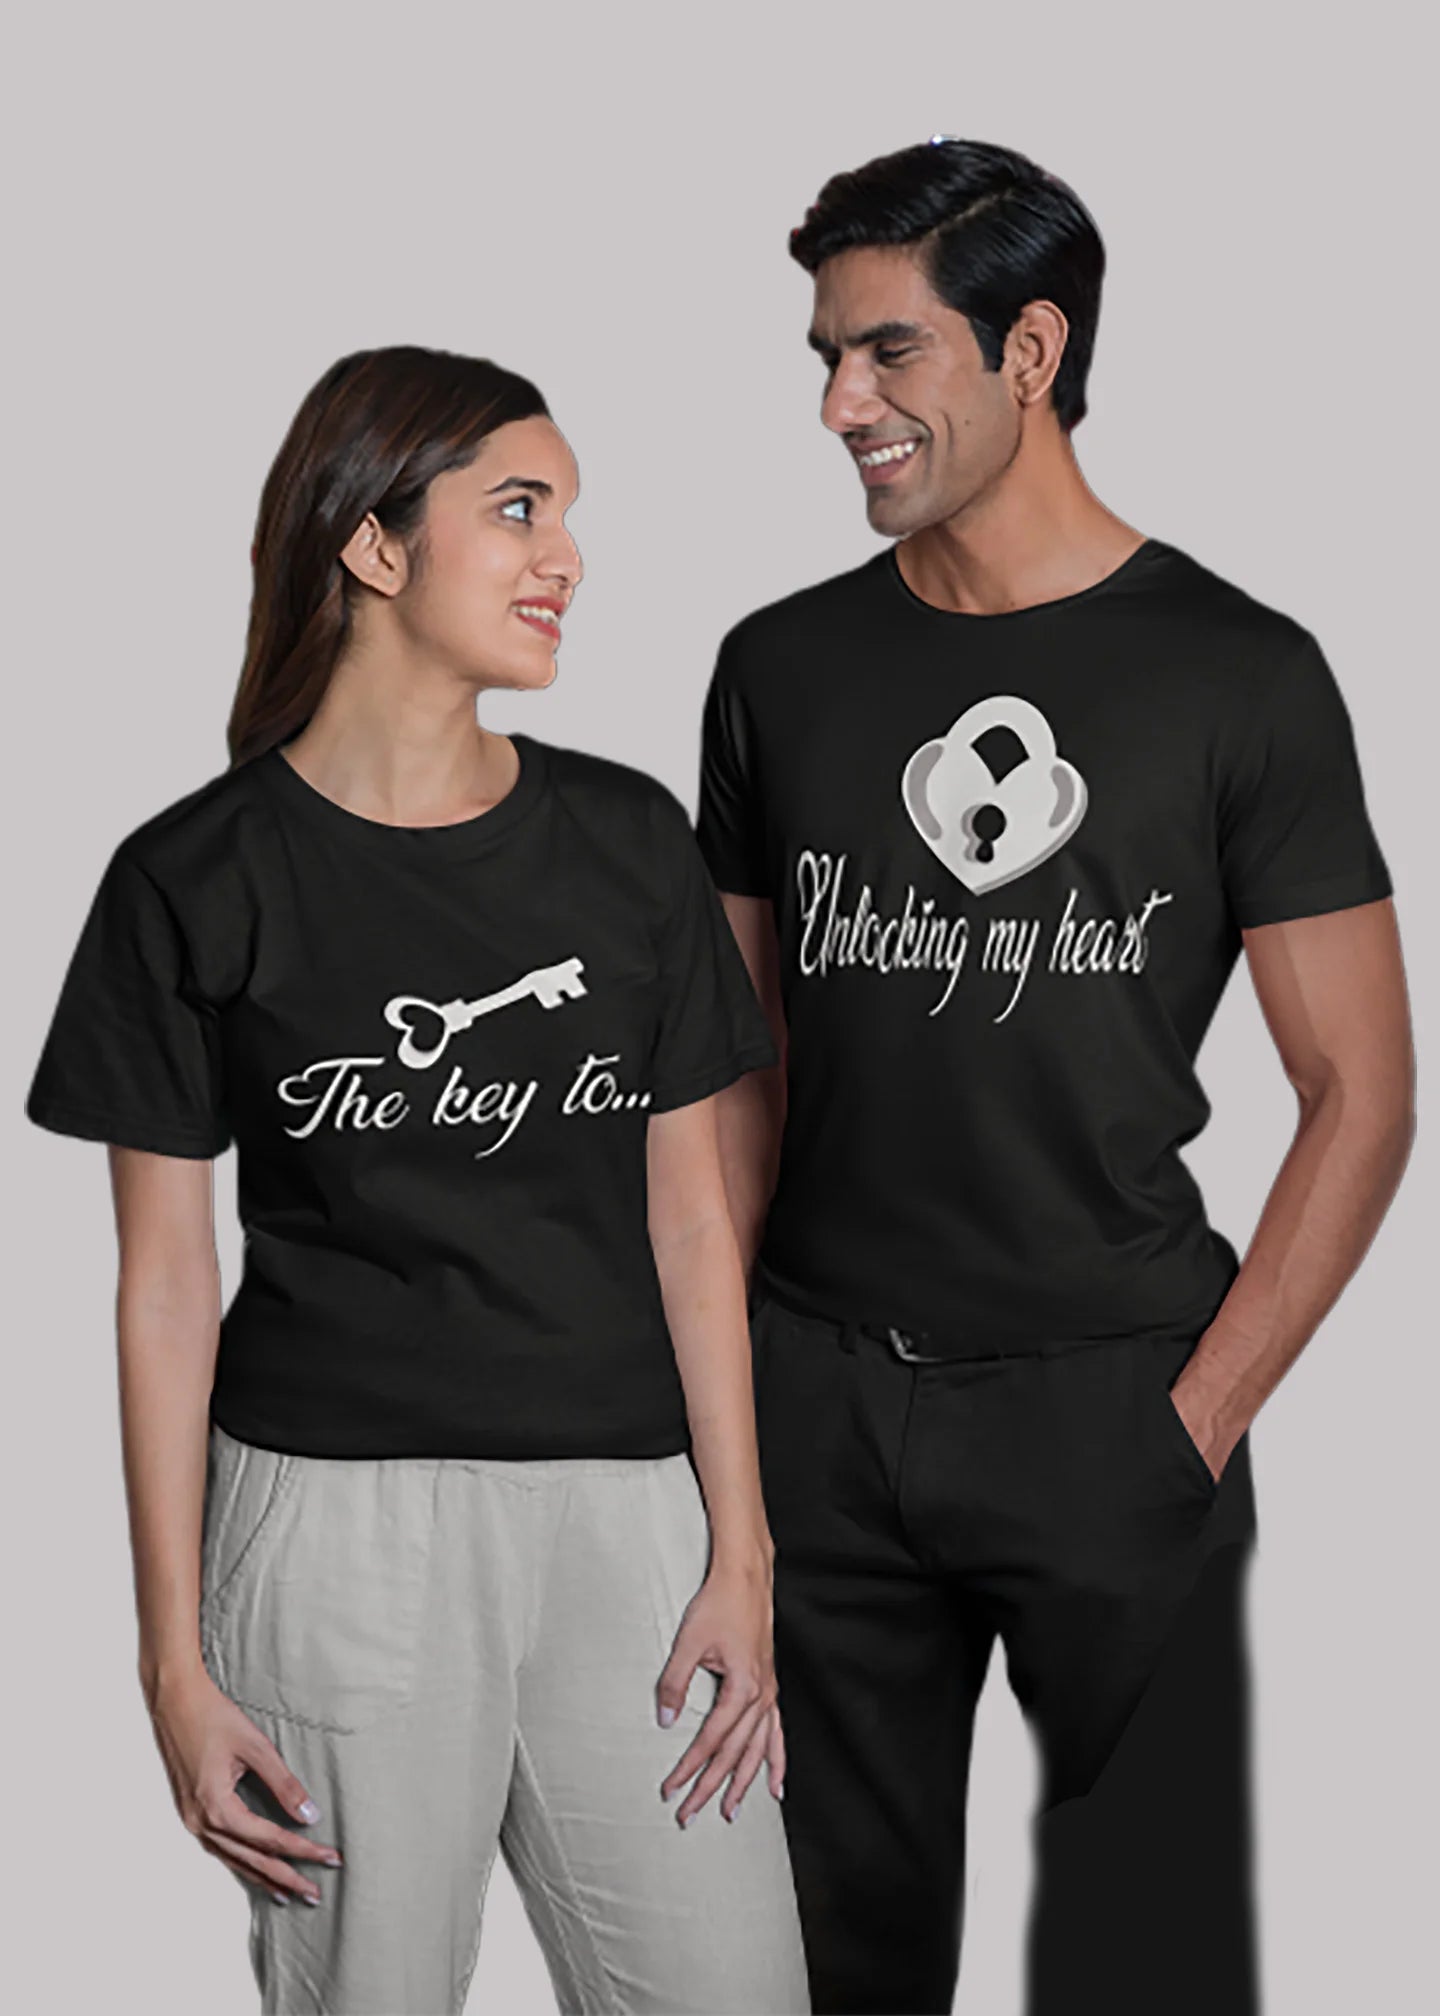 The key to unlocking my heart Printed Couple T-shirt